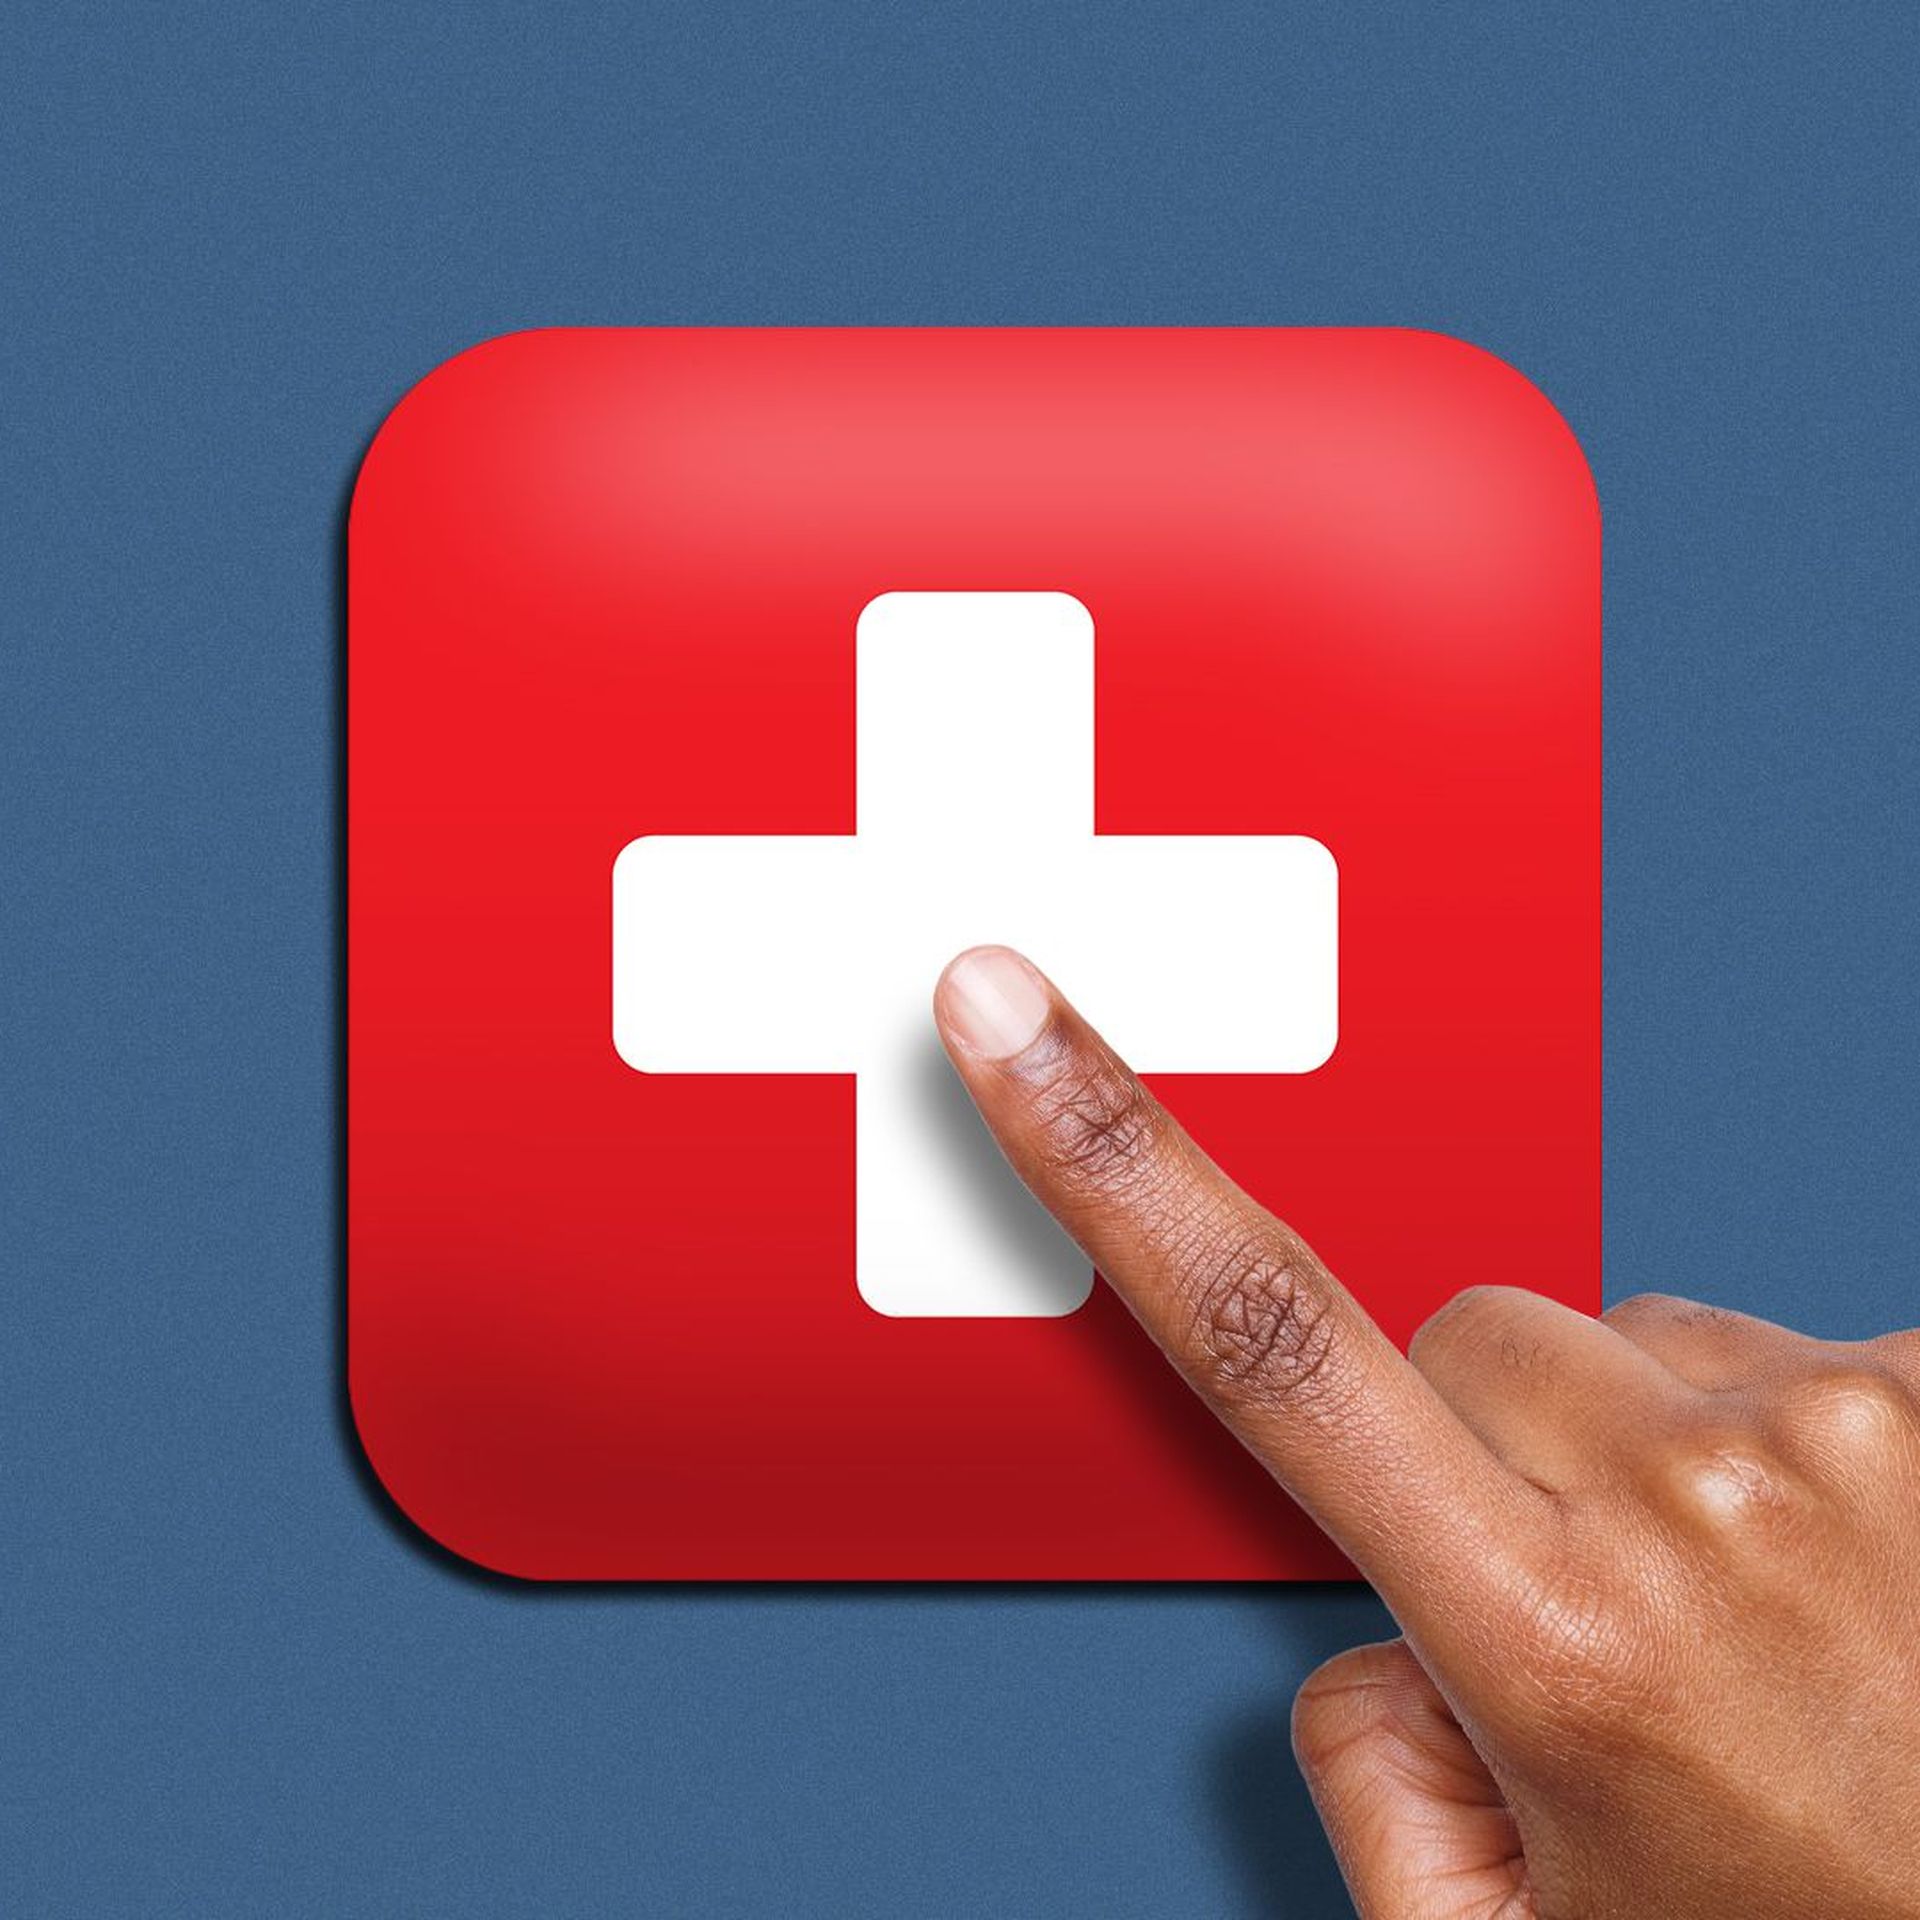 Illustration of a hand tapping an app icon with a medical cross